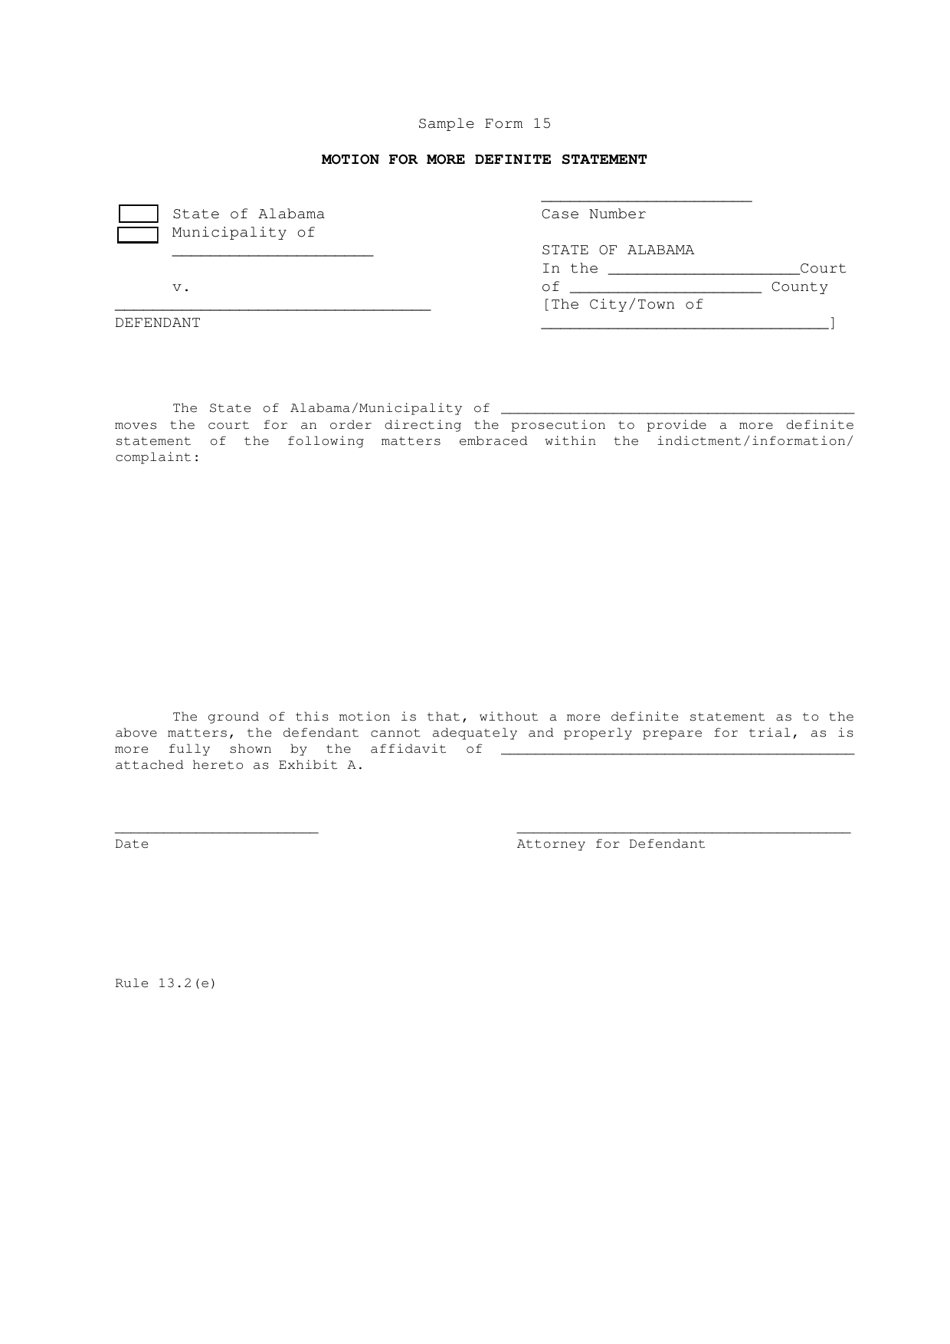 Sample Form 15 Motion for More Definite Statement - Alabama, Page 1